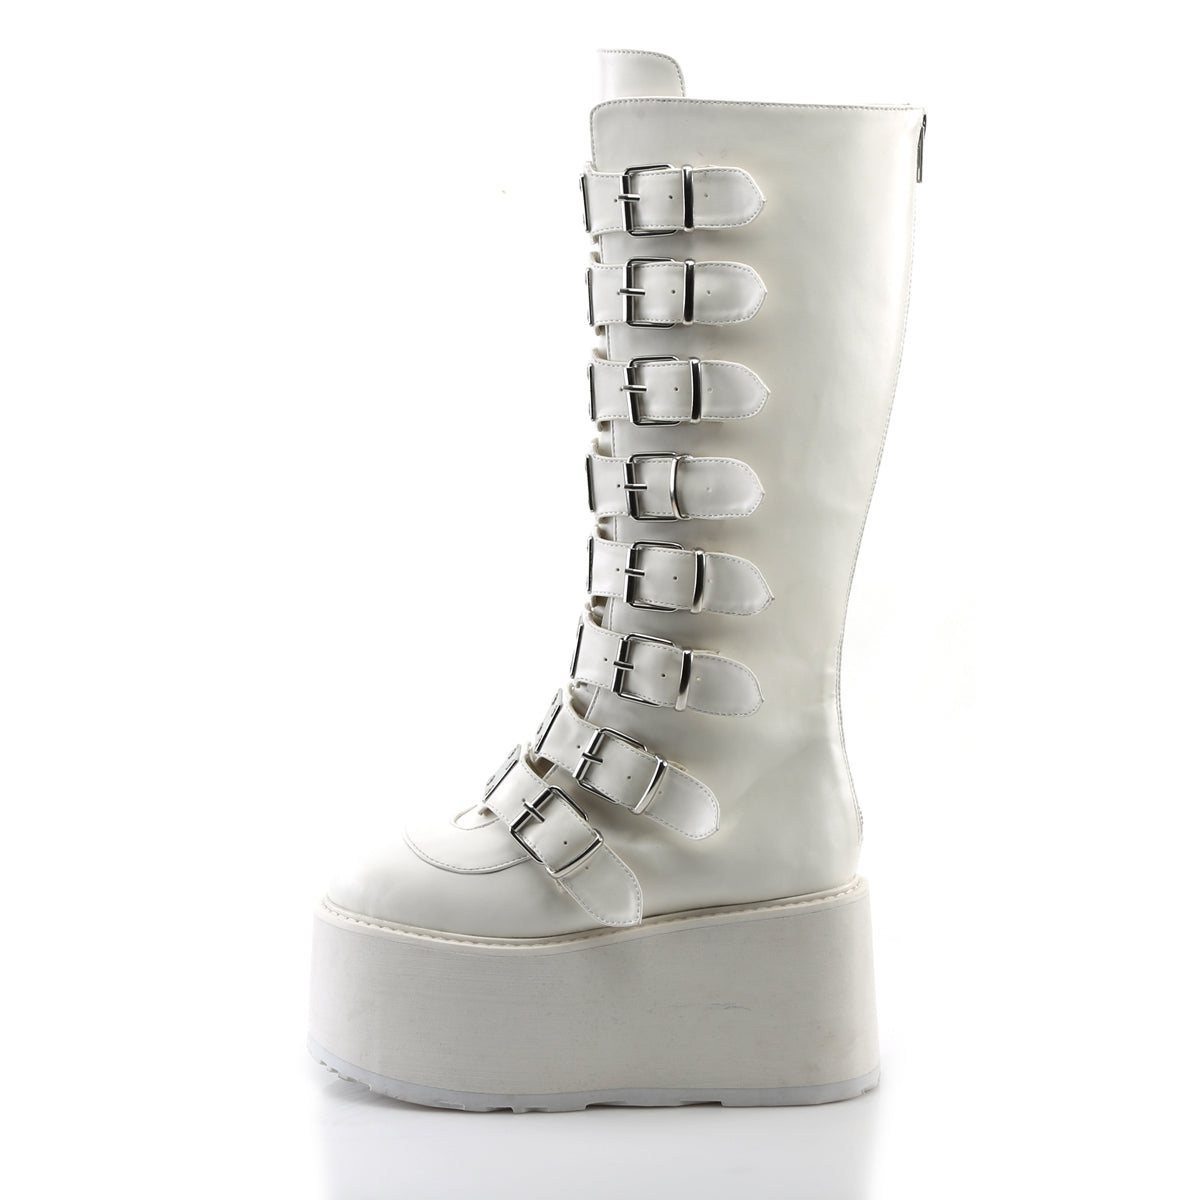 DemoniaCult Womens Boots DAMNED-318 Wht Vegan Leather